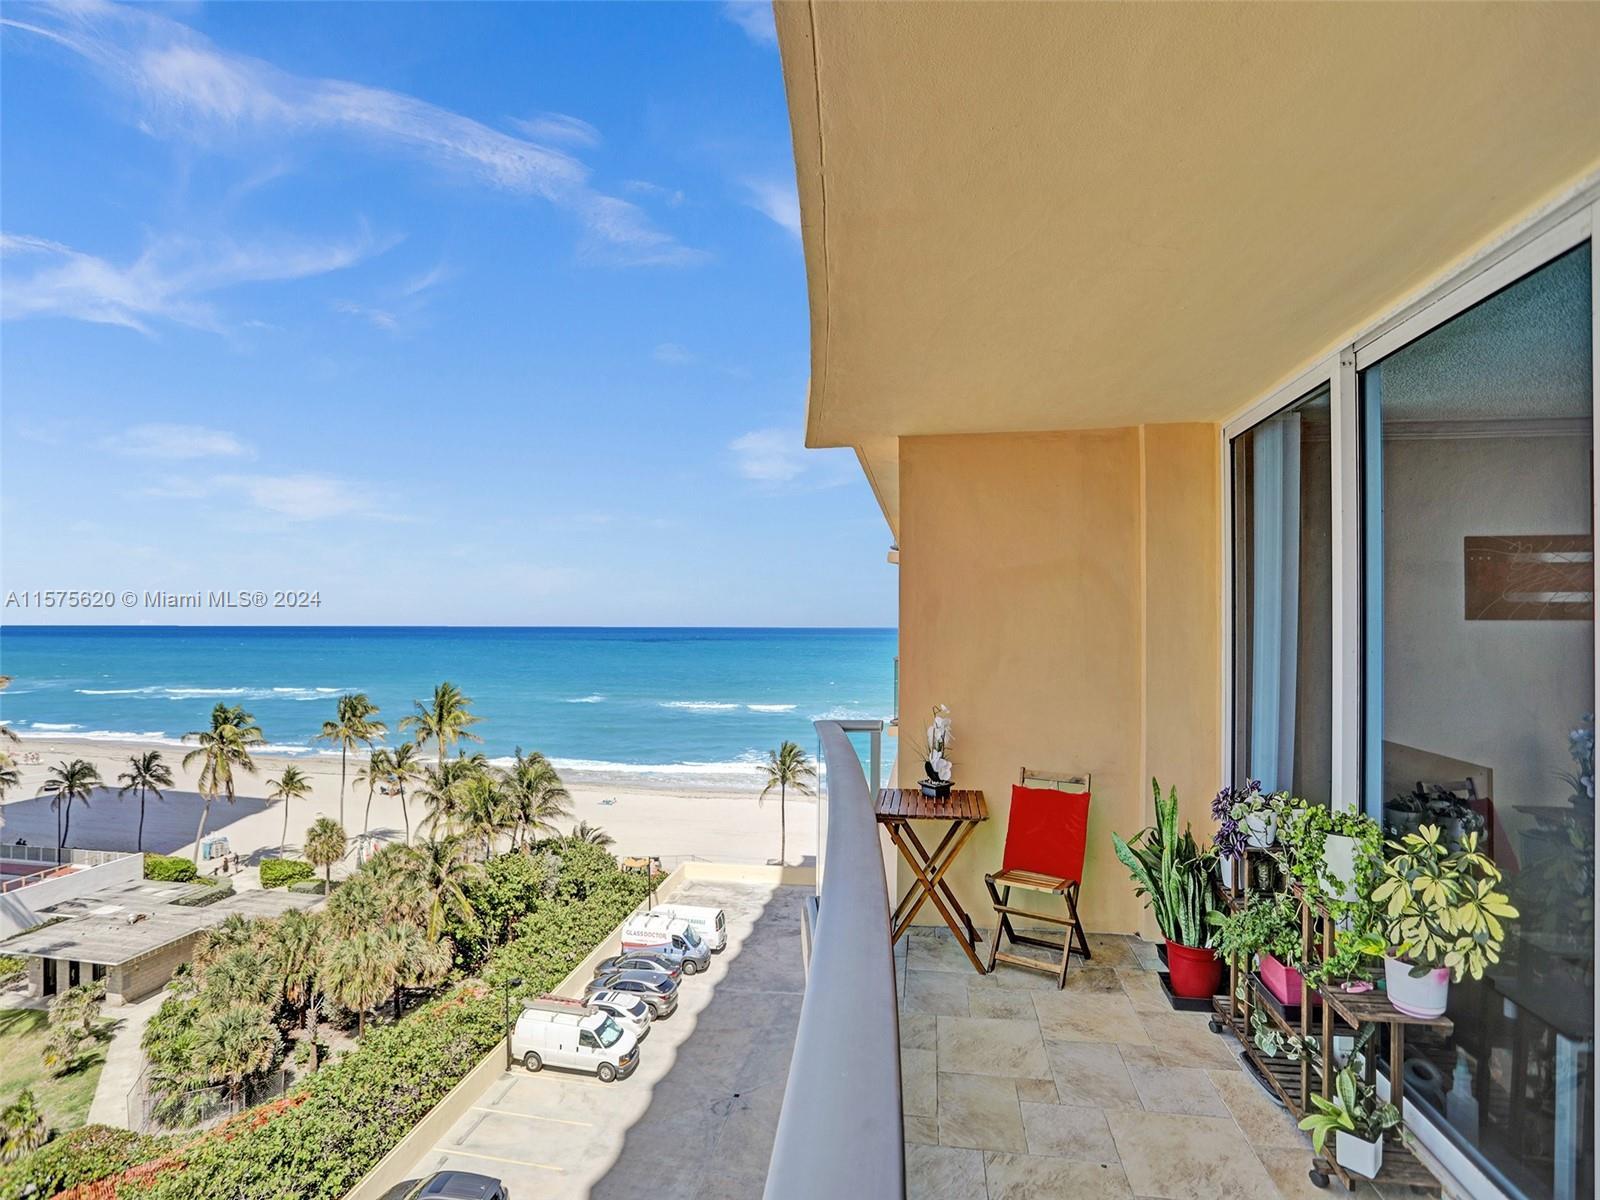 Photo of 2501 S Ocean Dr #705 in Hollywood, FL